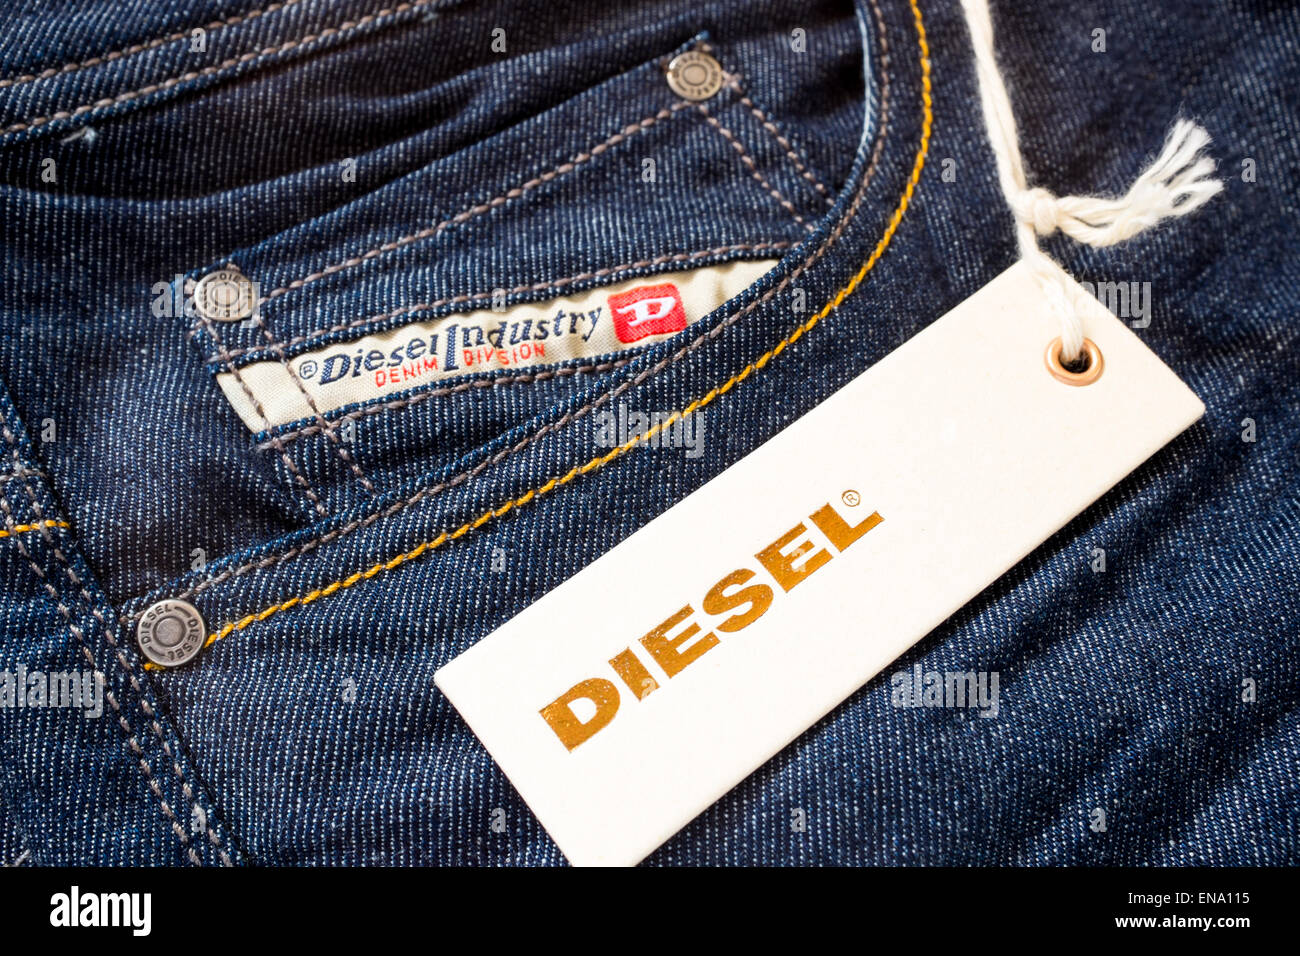 Close up of diesel jeans with diesel tag attached Stock Photo - Alamy